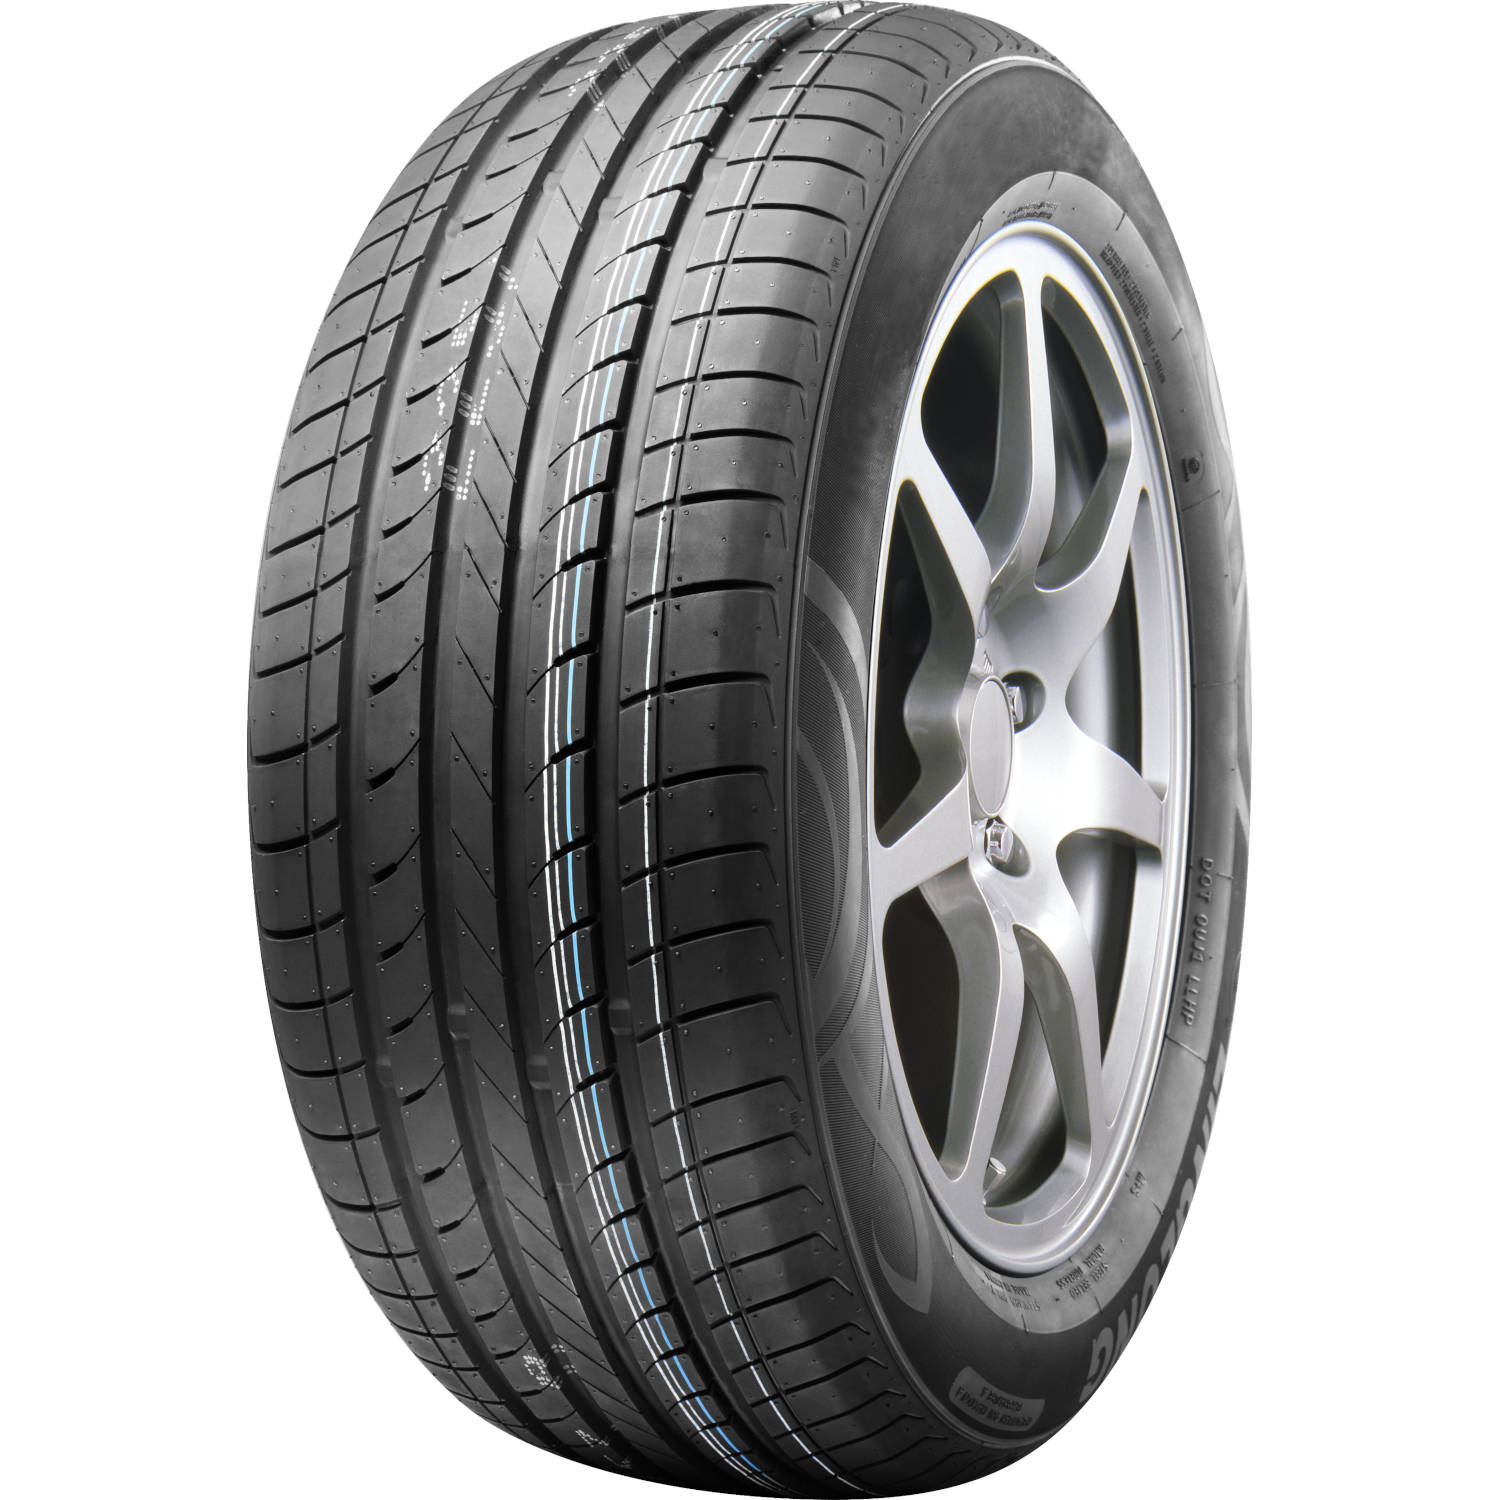 ROAD ONE CAVALRY HP 225/60R17 (27.6X8.9R 17) Tires